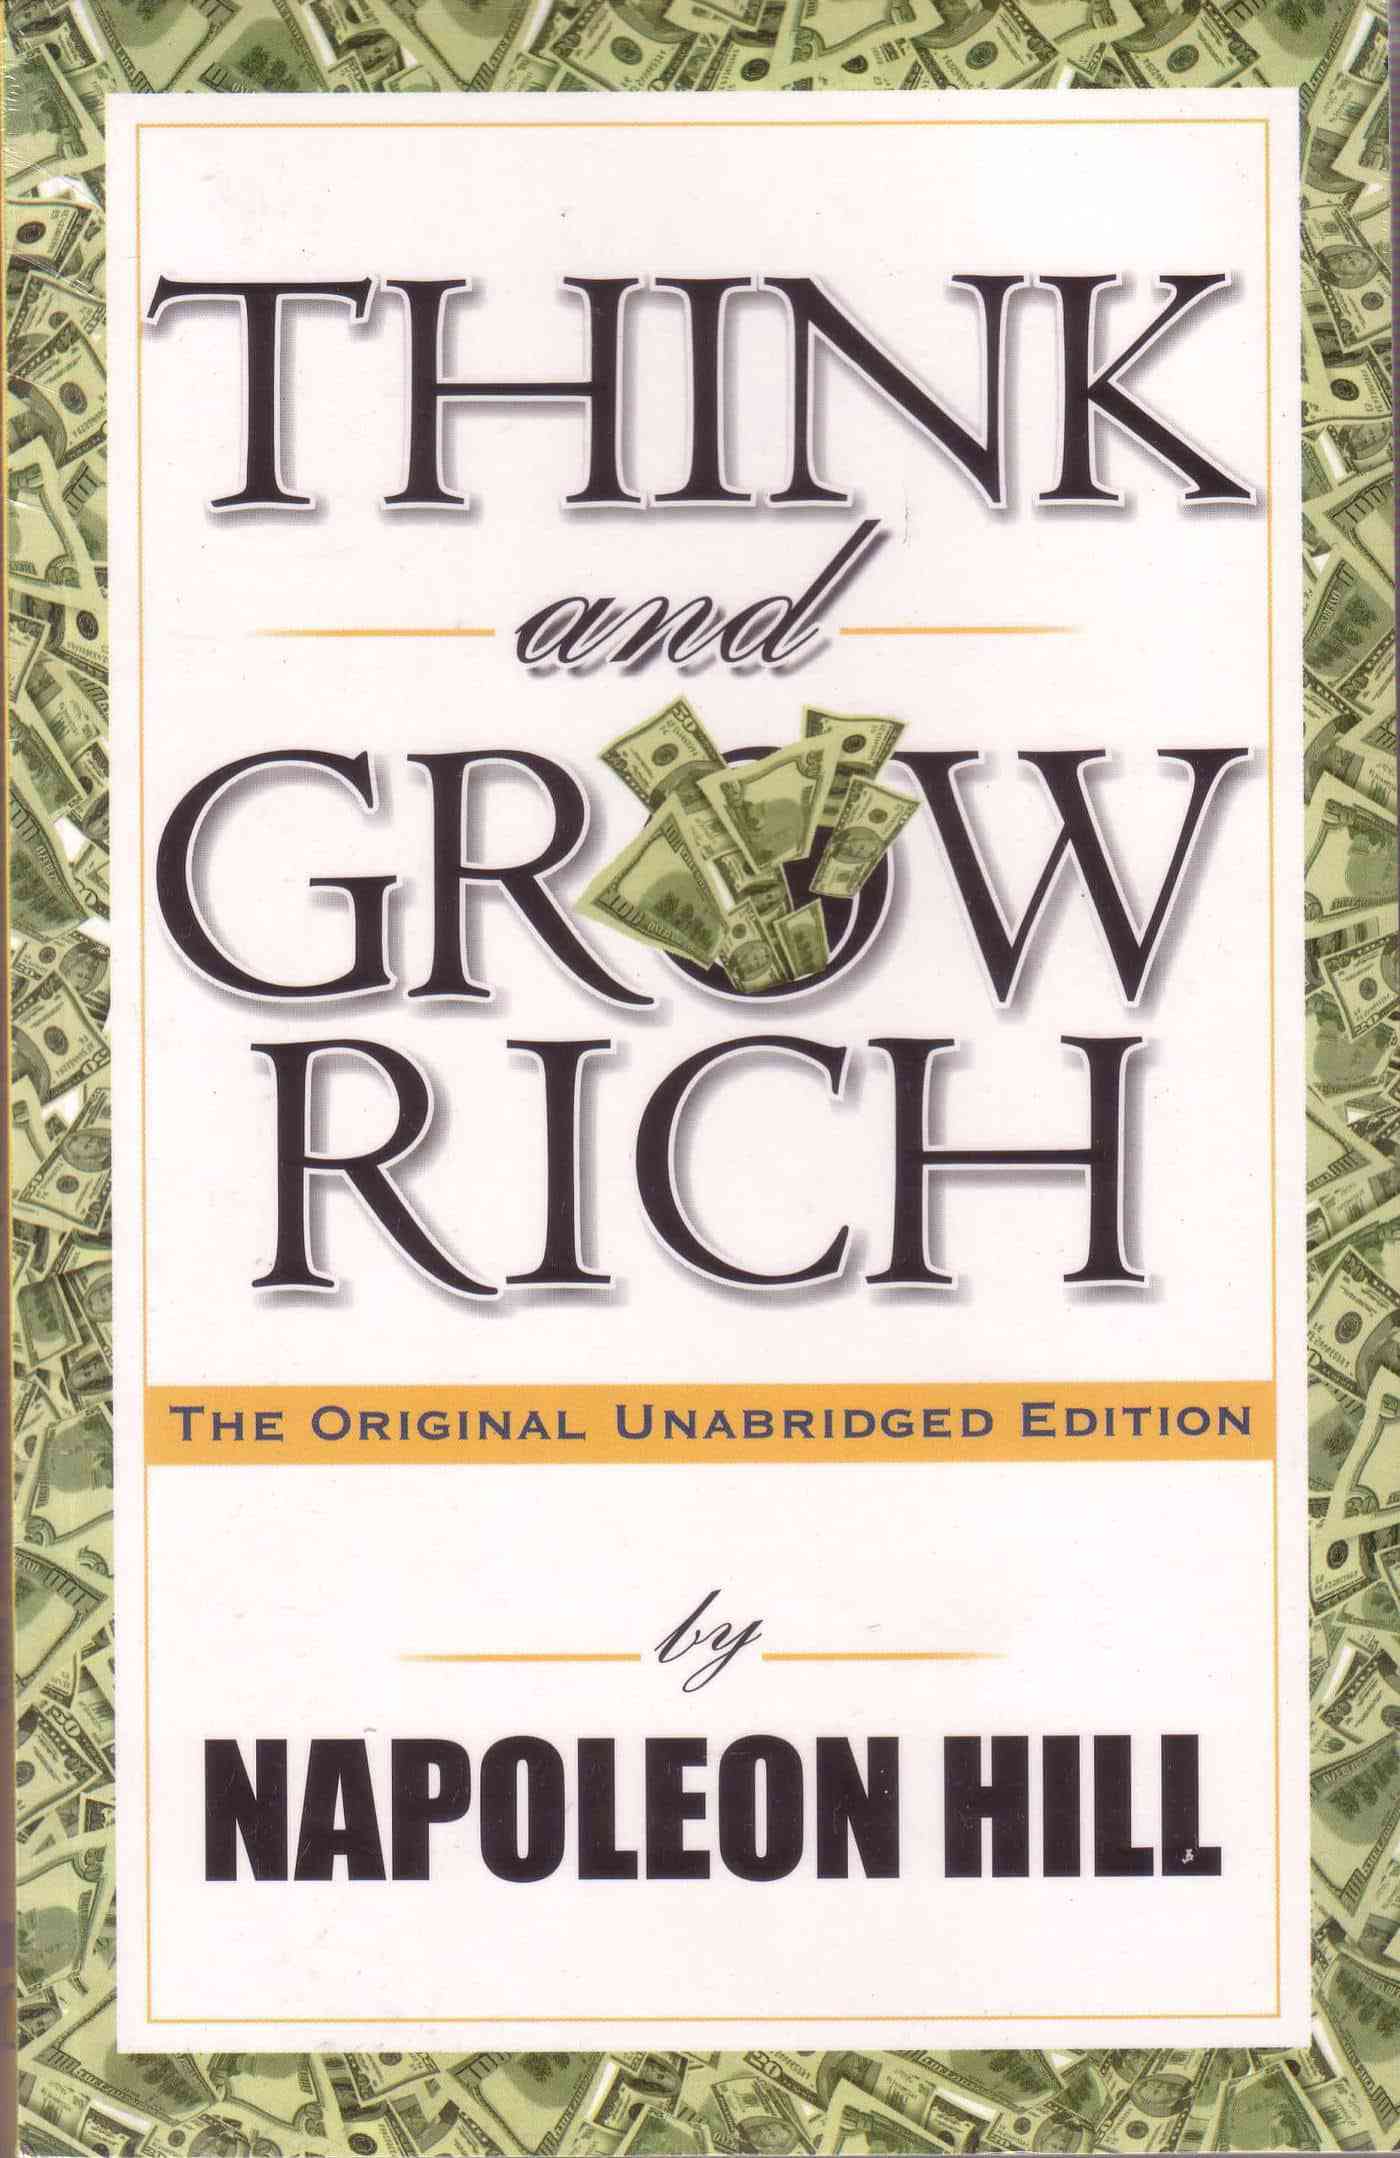 book review on think and grow rich